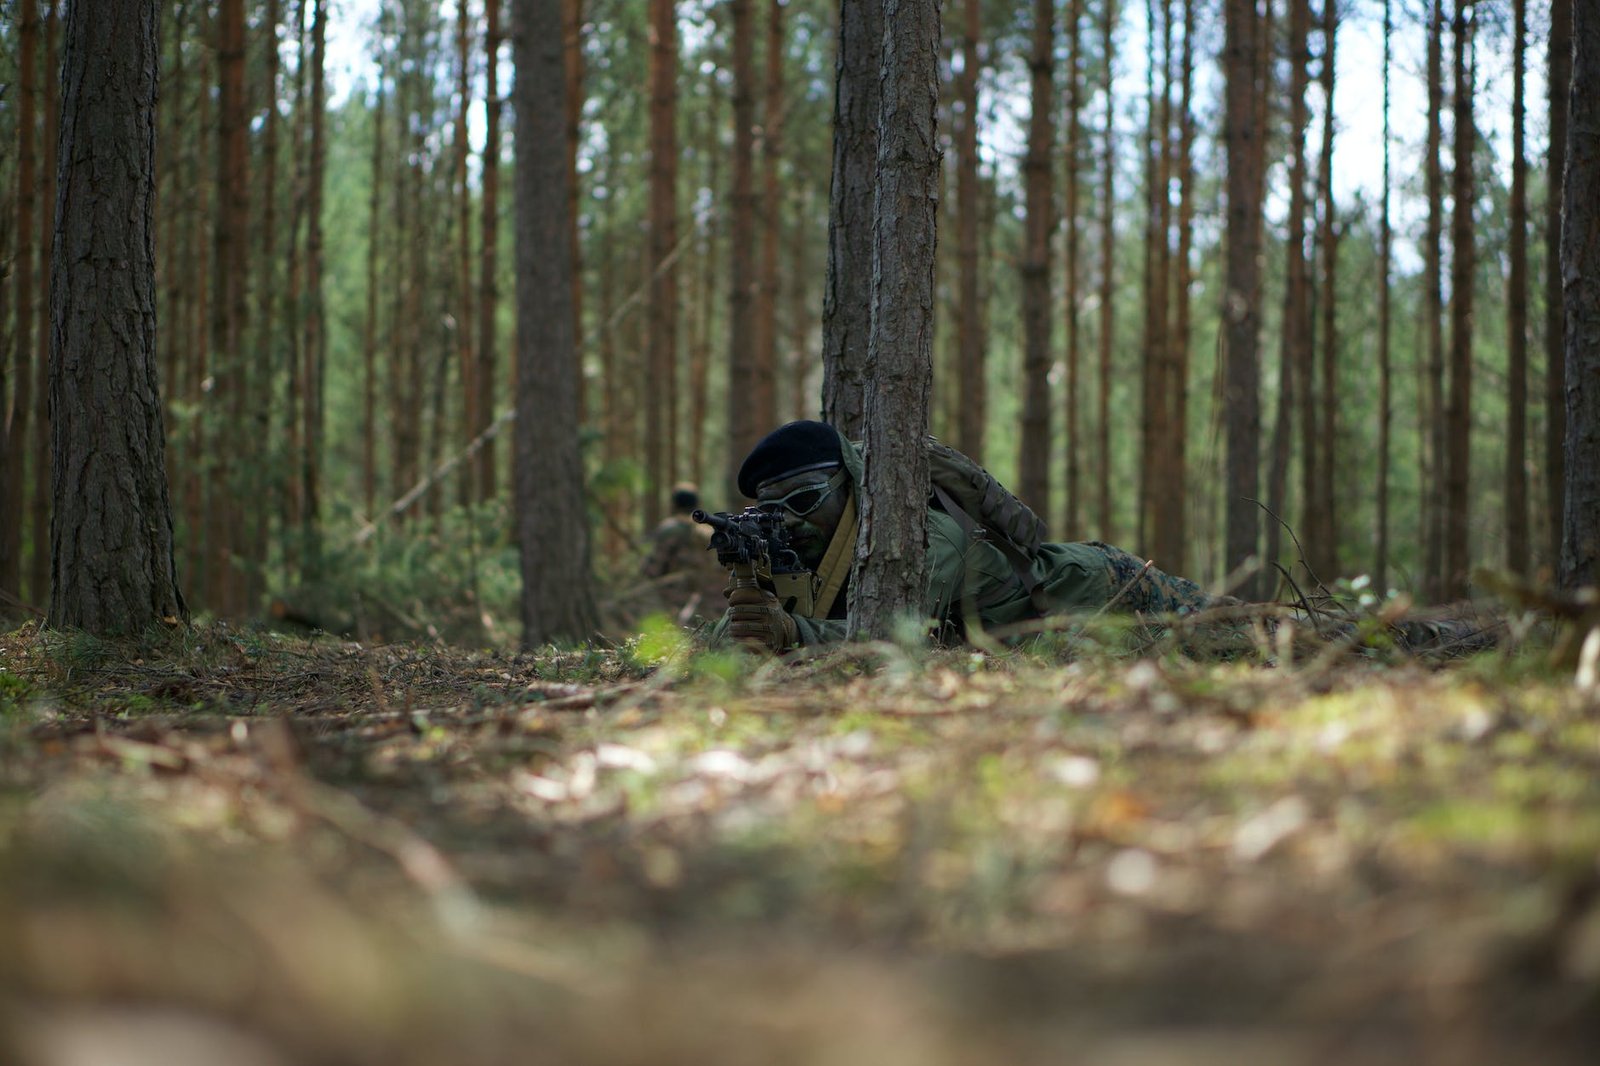 man in military uniform and a backpack lying on ground surrounded by trees